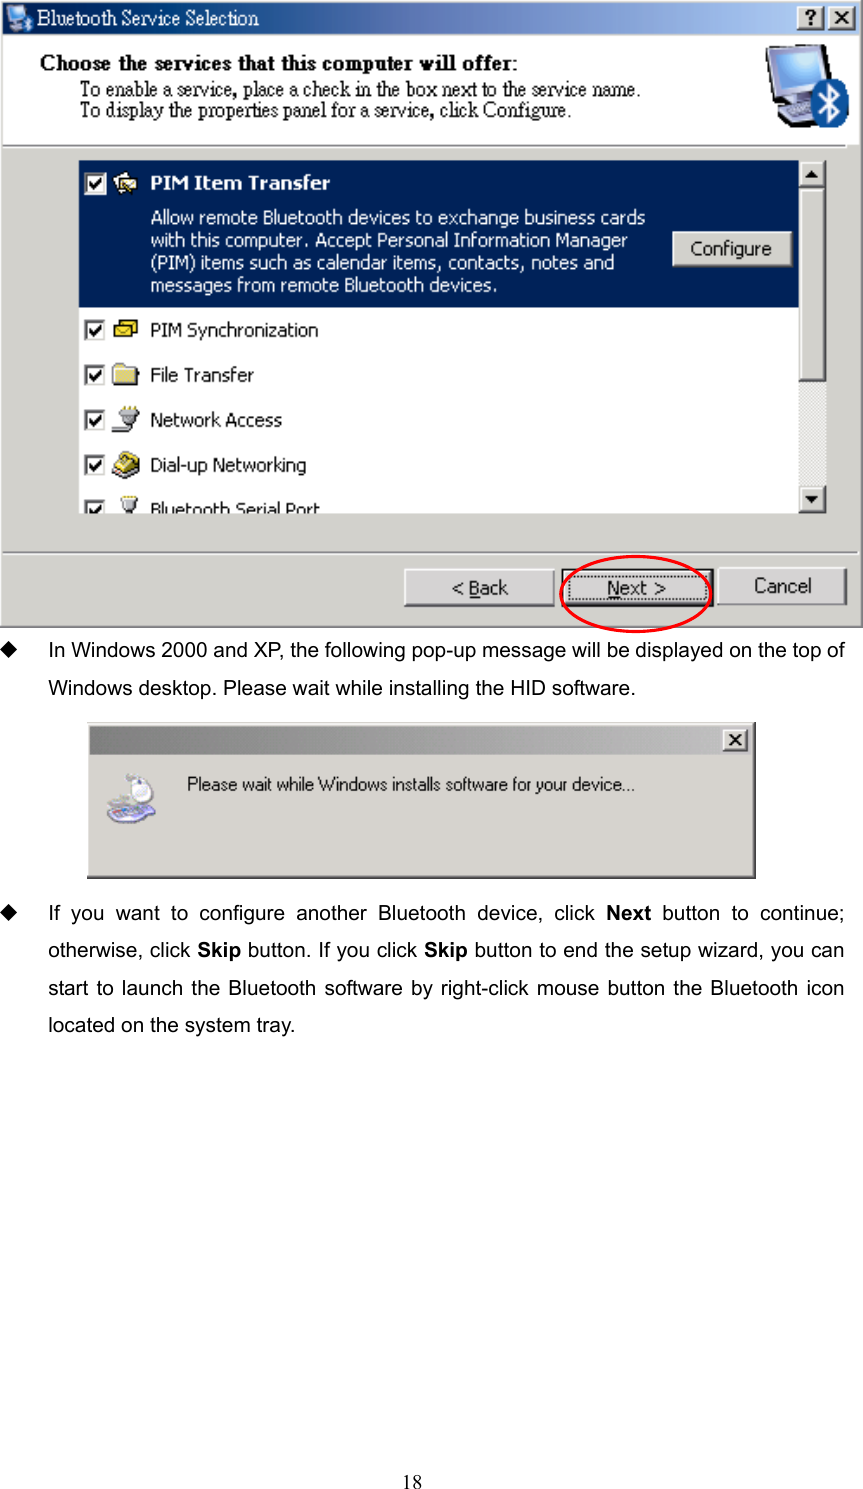  18    In Windows 2000 and XP, the following pop-up message will be displayed on the top of Windows desktop. Please wait while installing the HID software.    If you want to configure another Bluetooth device, click Next button to continue; otherwise, click Skip button. If you click Skip button to end the setup wizard, you can start to launch the Bluetooth software by right-click mouse button the Bluetooth icon located on the system tray. 